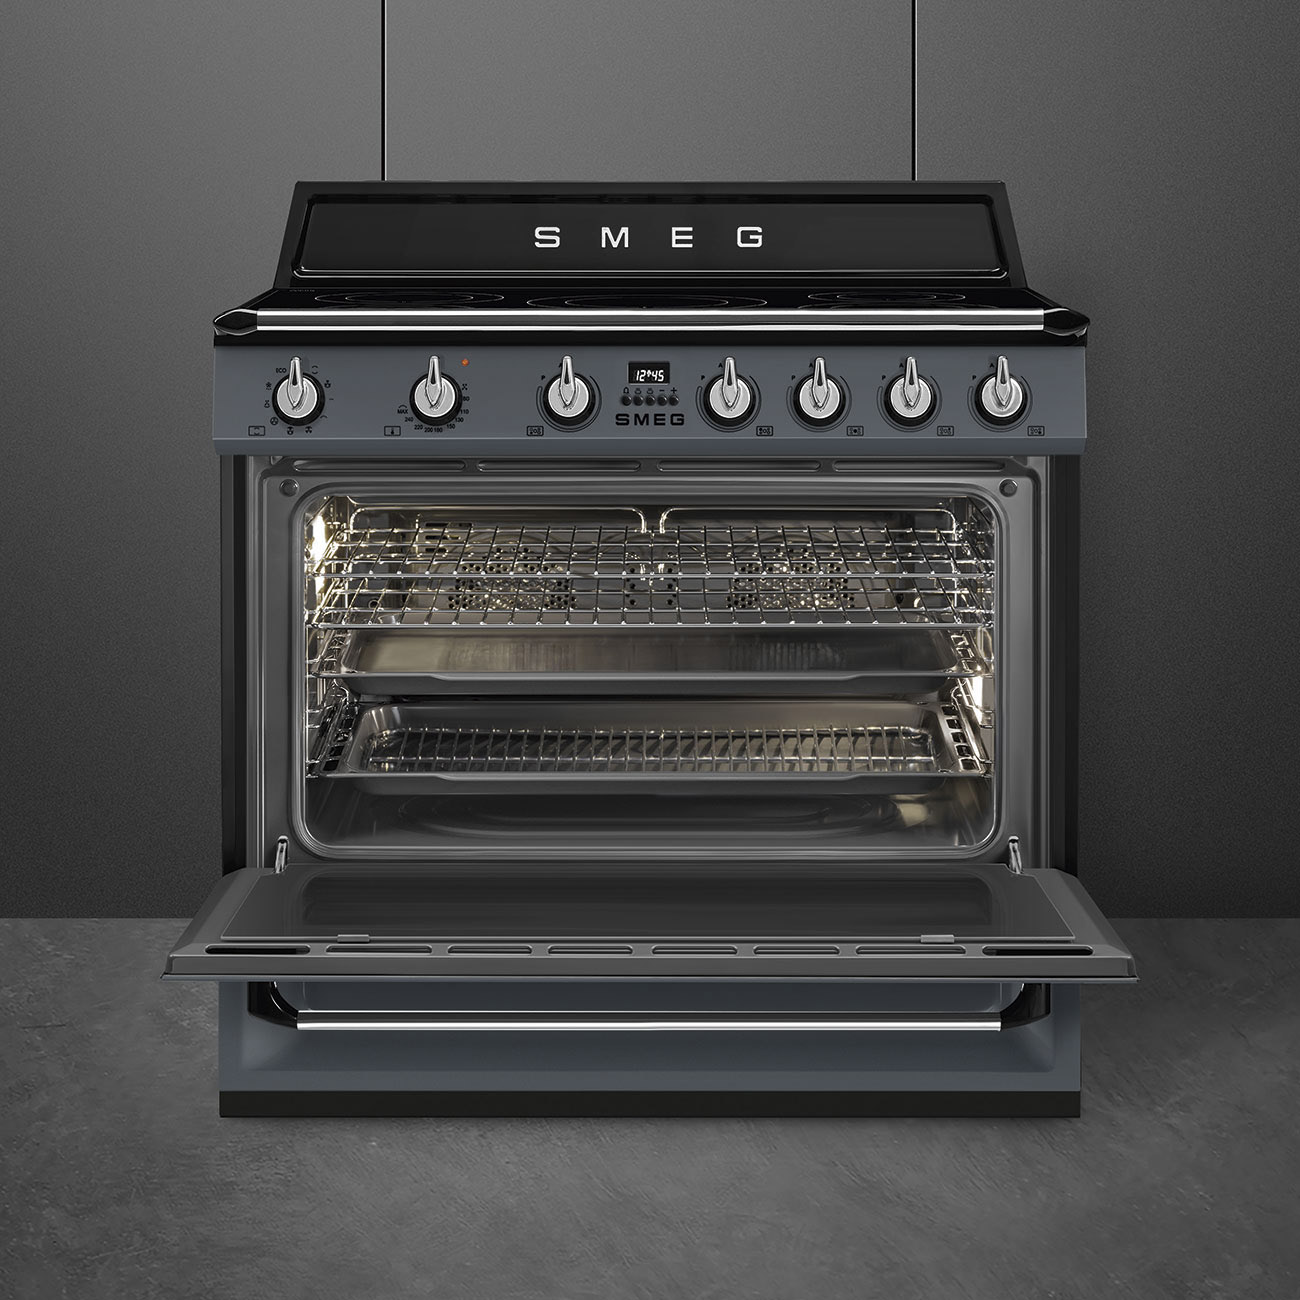 Smeg Slate Grey Cooker with Induction Hob_3